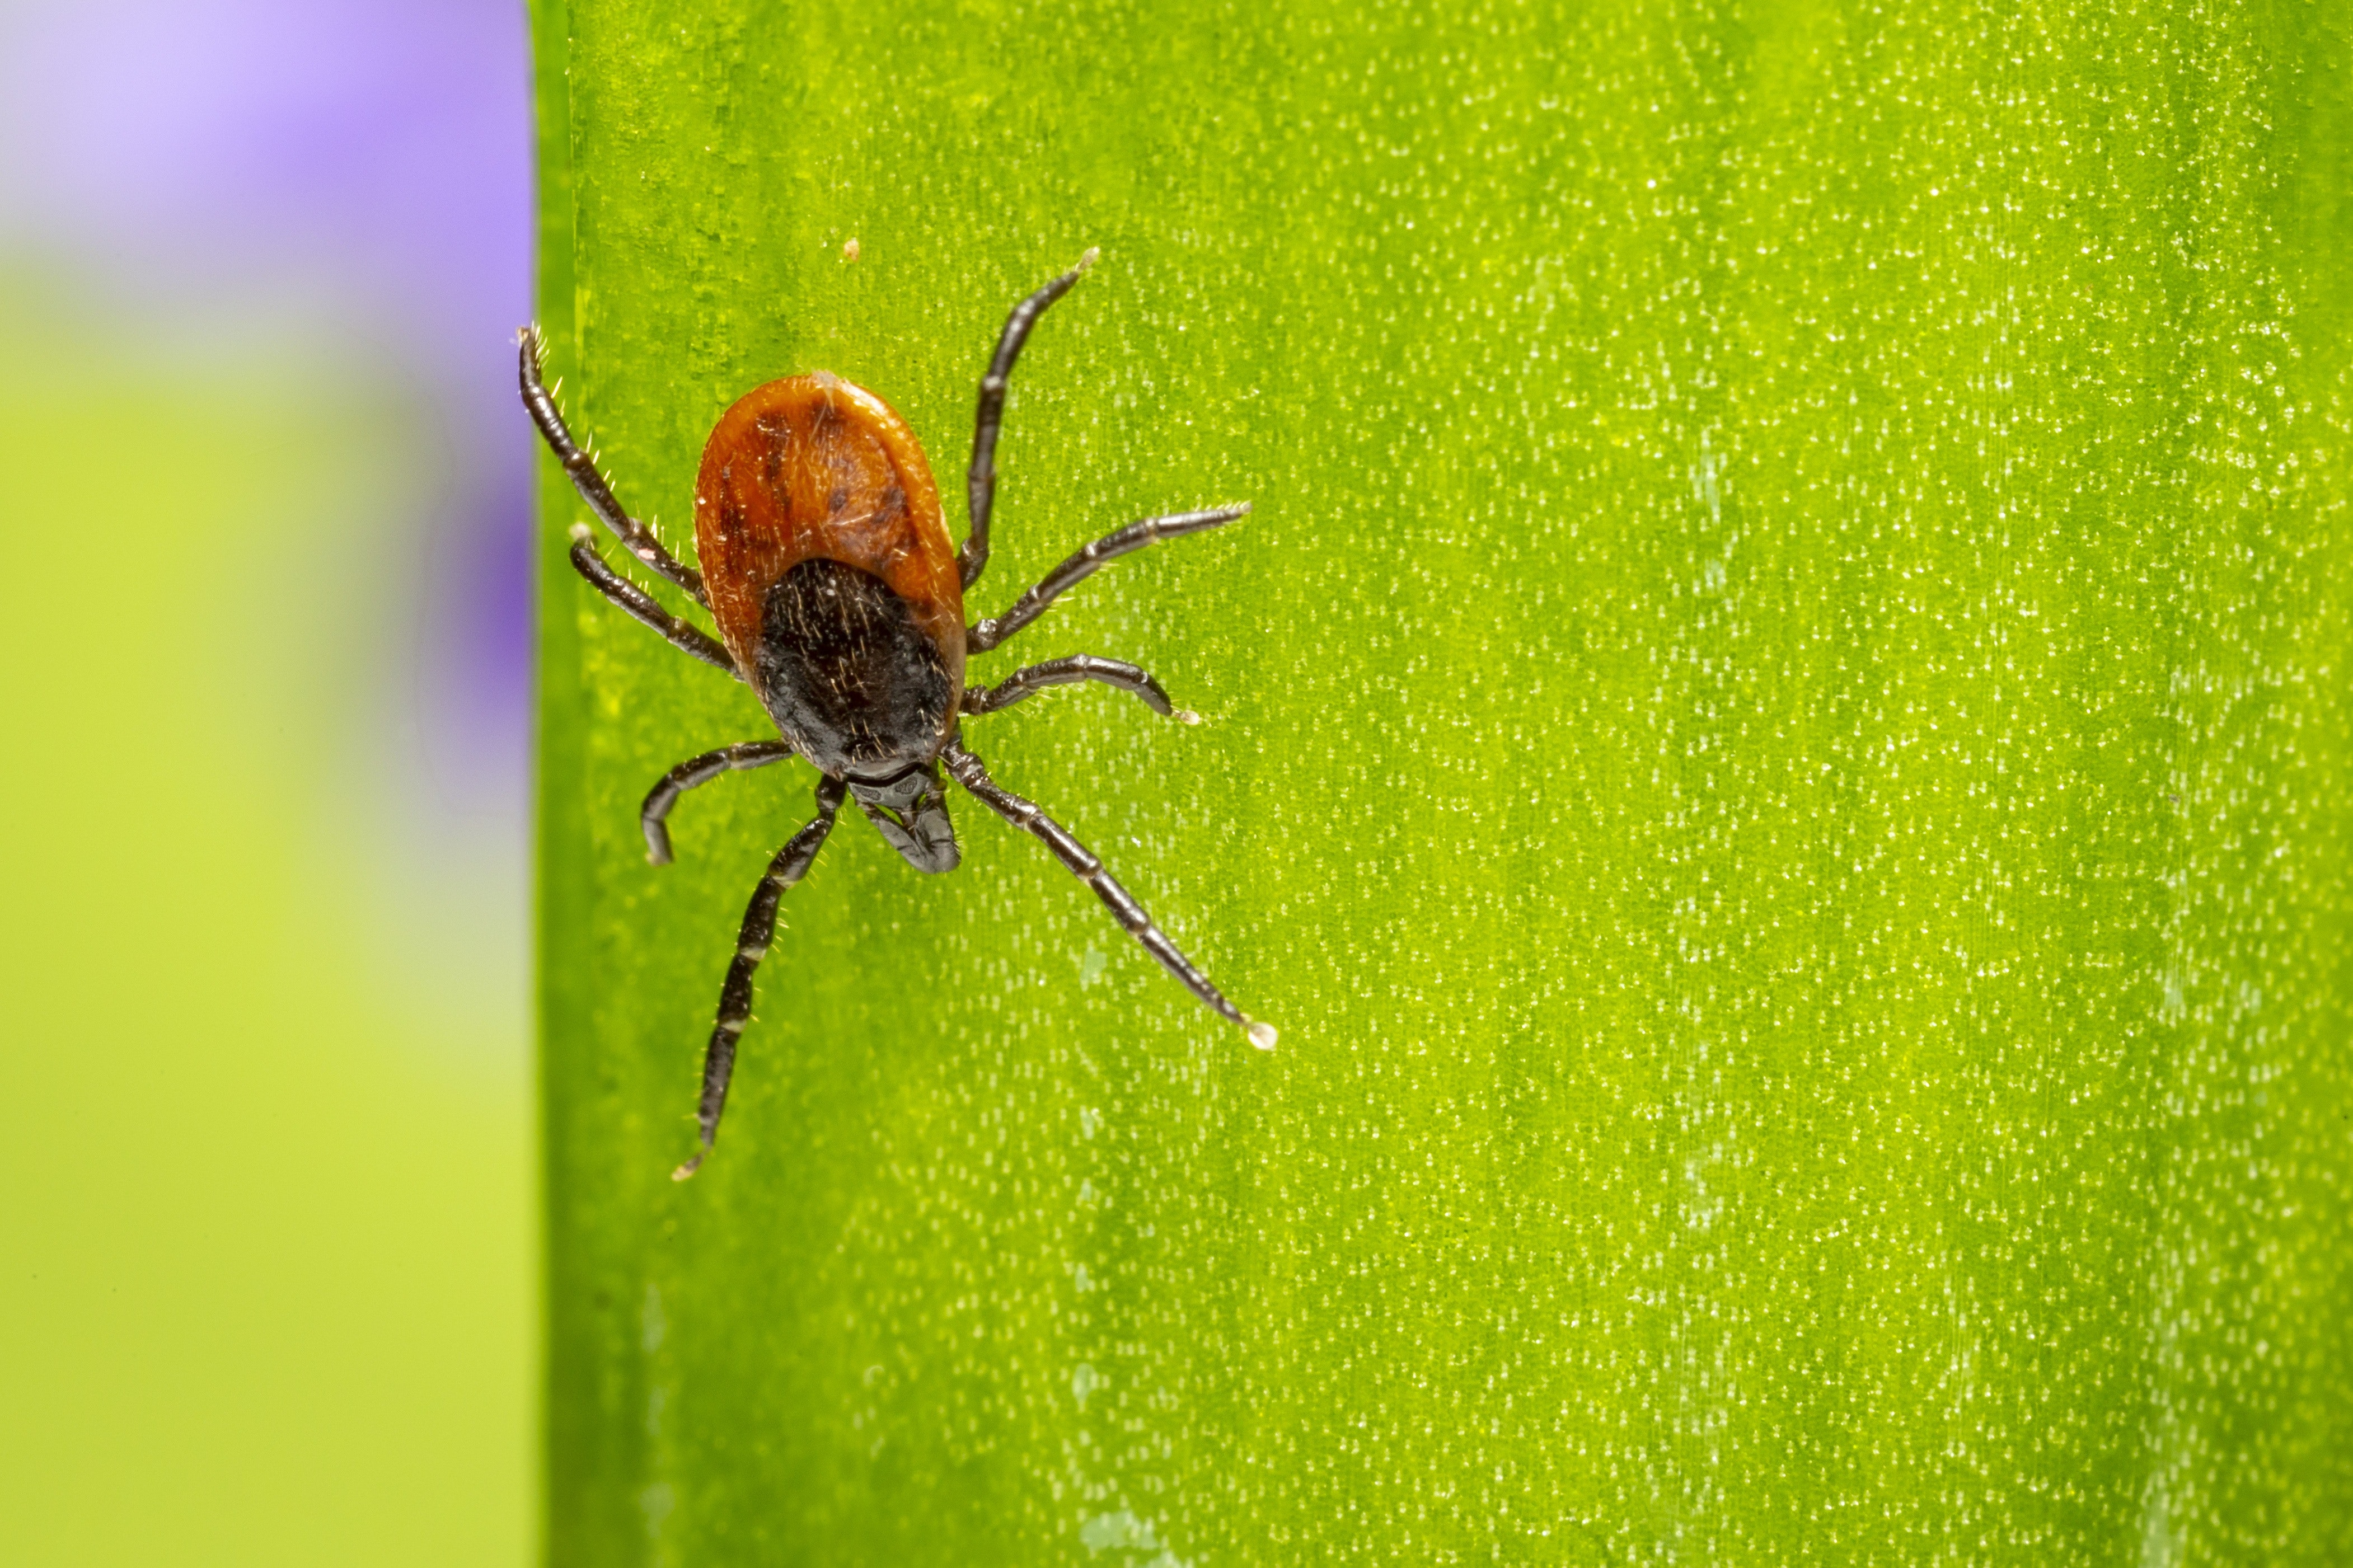 CAPC recommends Michigan pet owners talk to local veterinarians about year-round protection from Lyme and Ehrlichiosis – transmitted by ticks – with annual testing and preventatives.